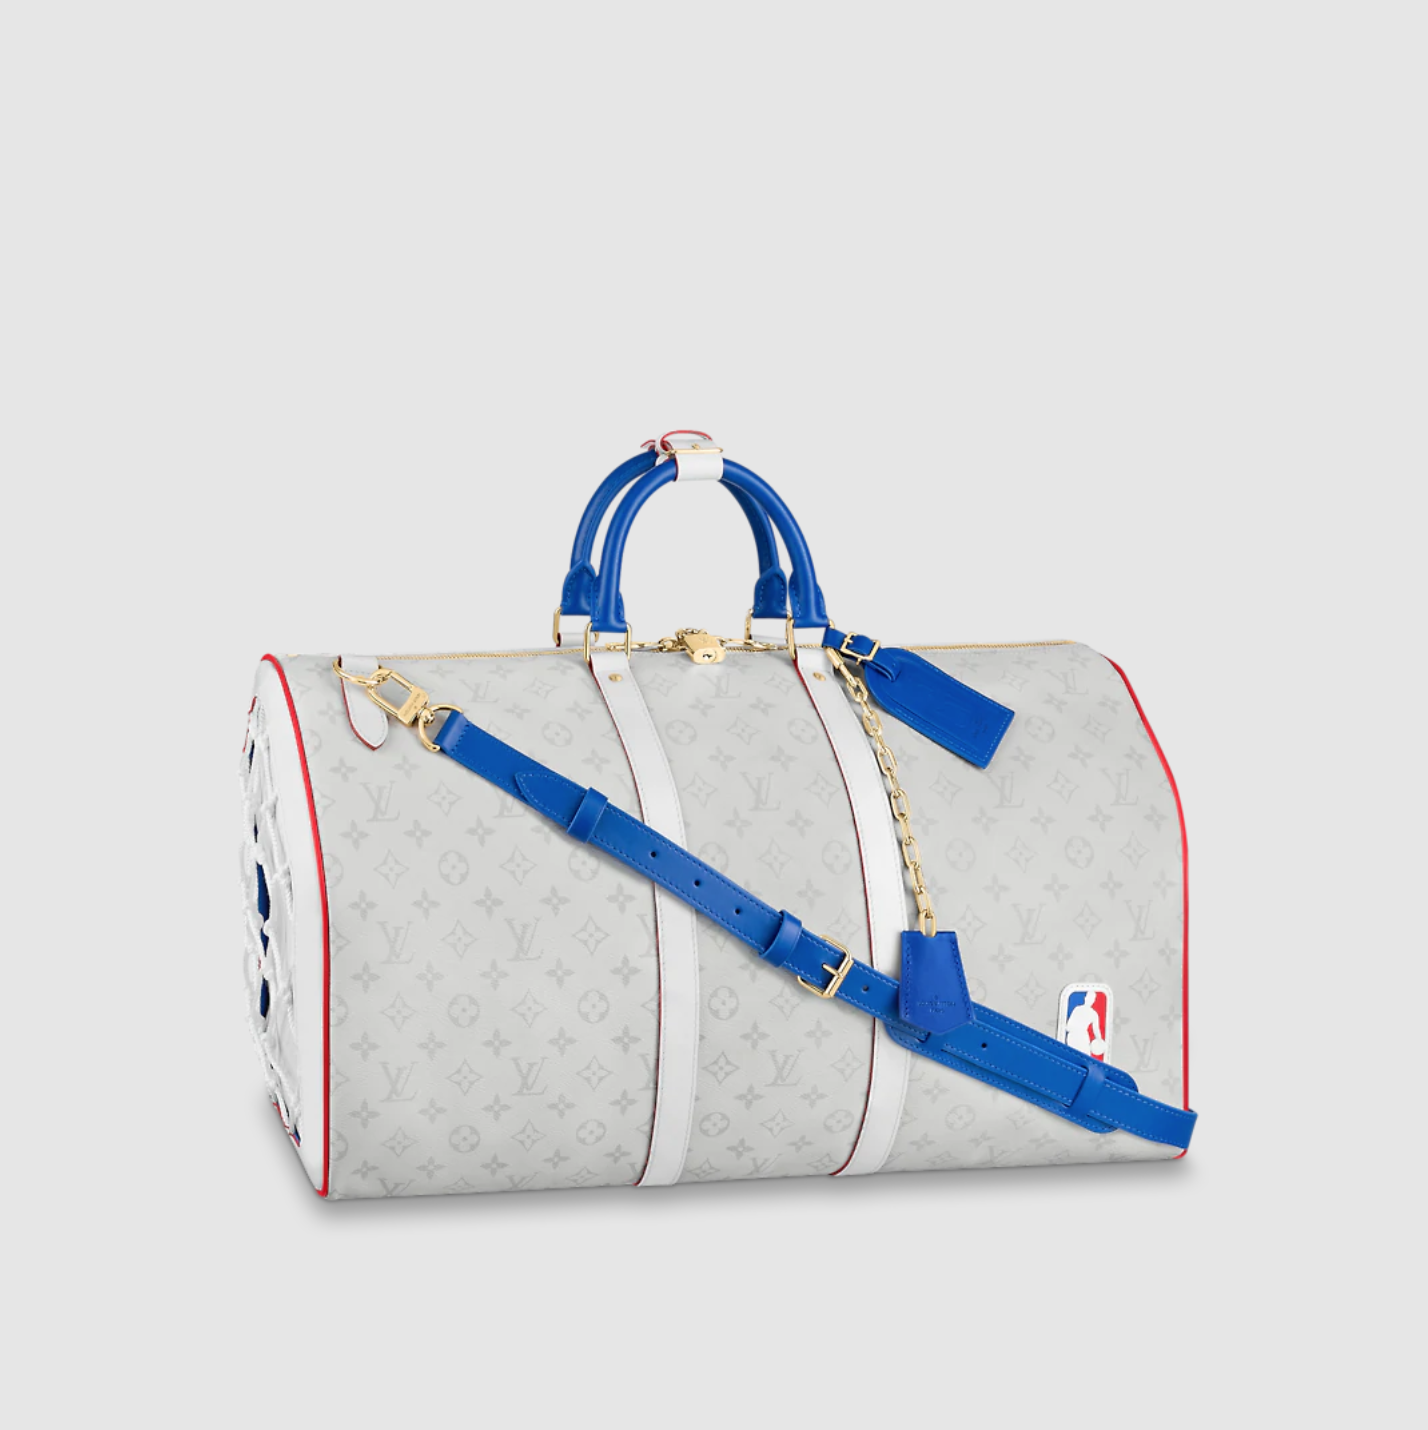 Louis Vuitton x NBA II: the most luxurious sports collection